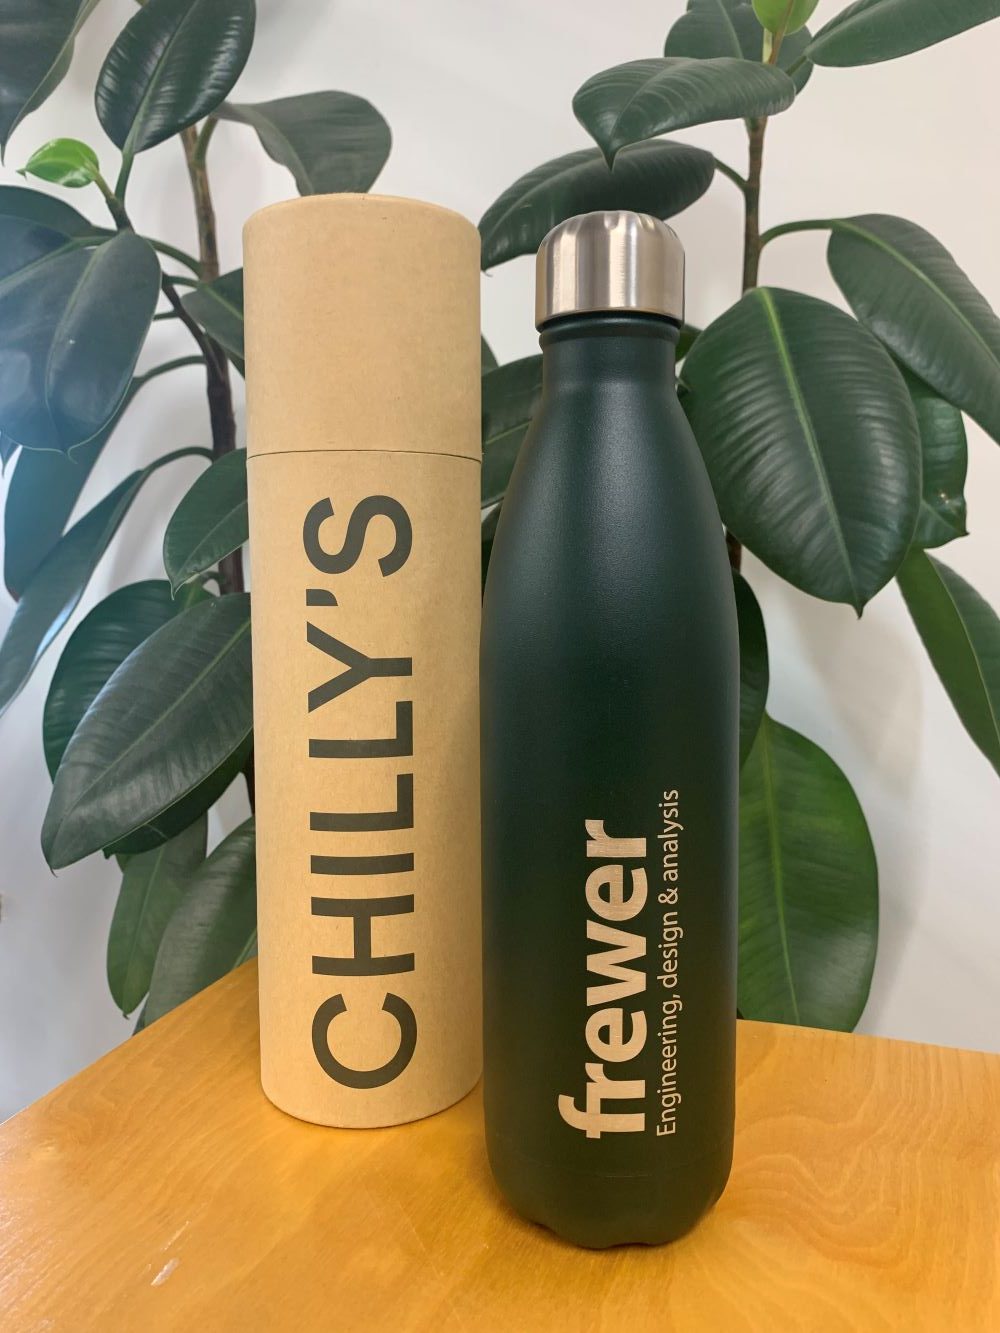 Our environmentally friendly Chilly bottles